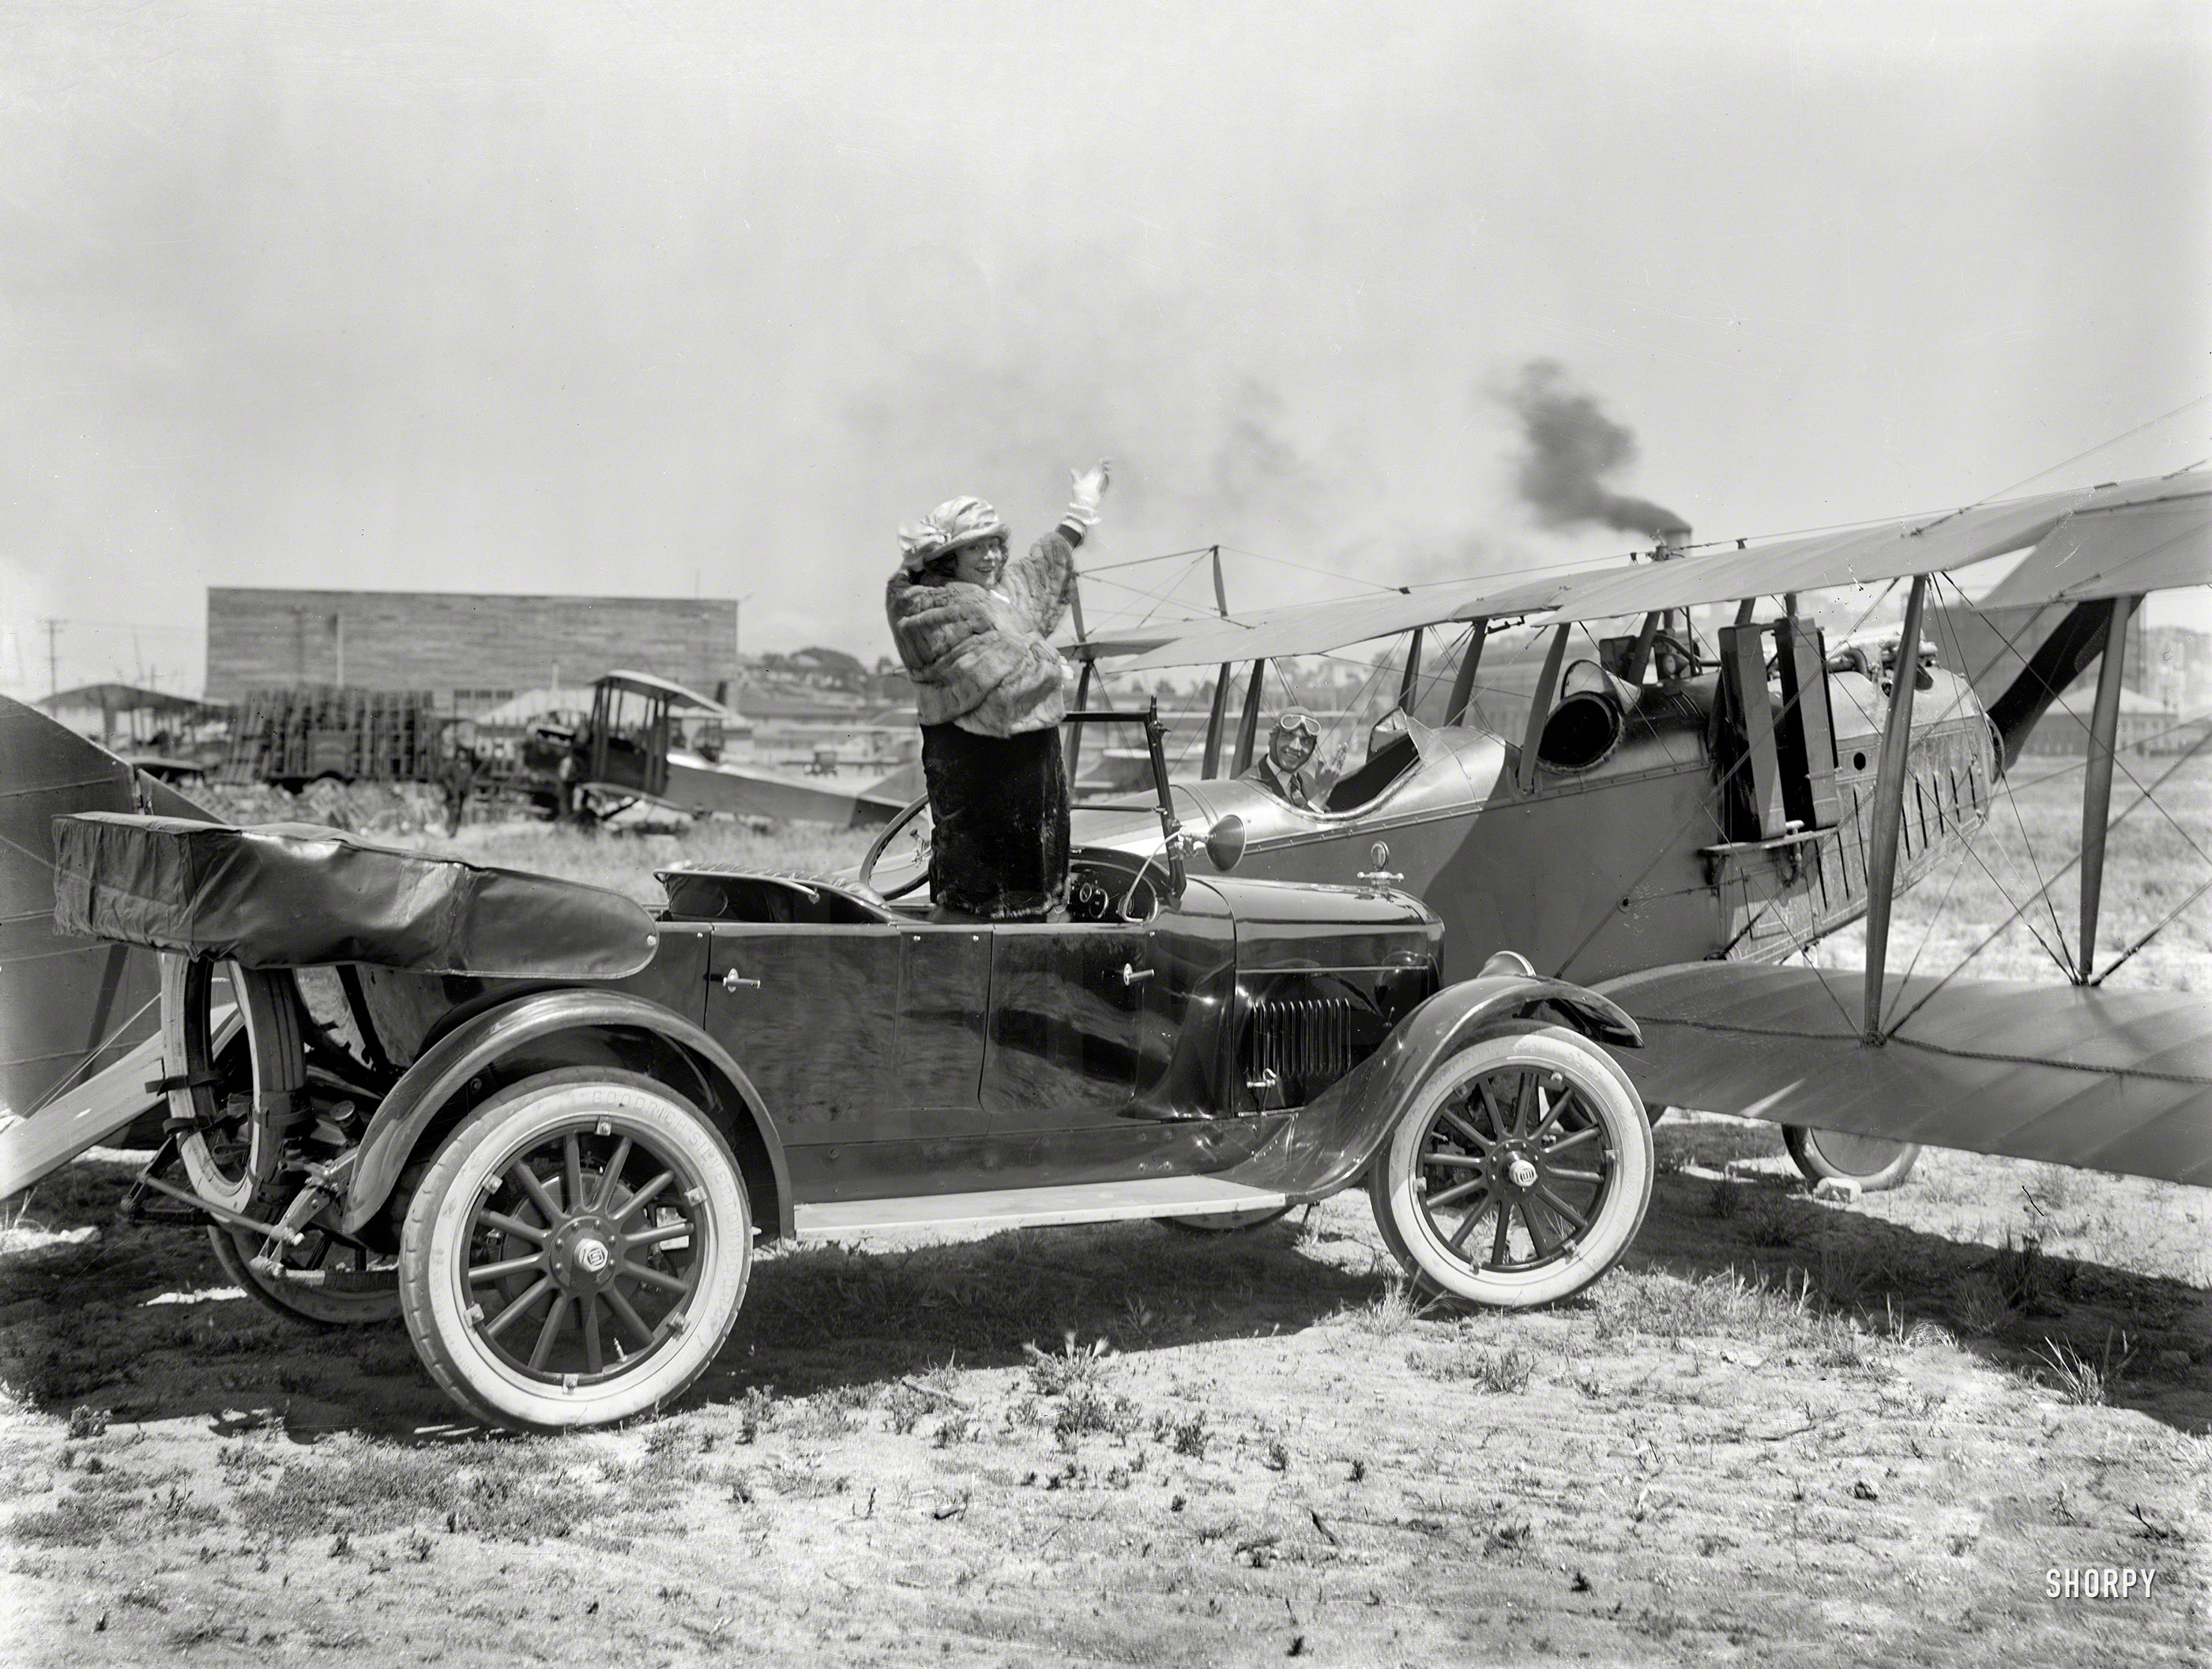 San Francisco circa 1920. "Studebaker touring car and biplane at airfield." With the fur possibly about to fly. 6½ x 8½ inch glass negative. View full size.